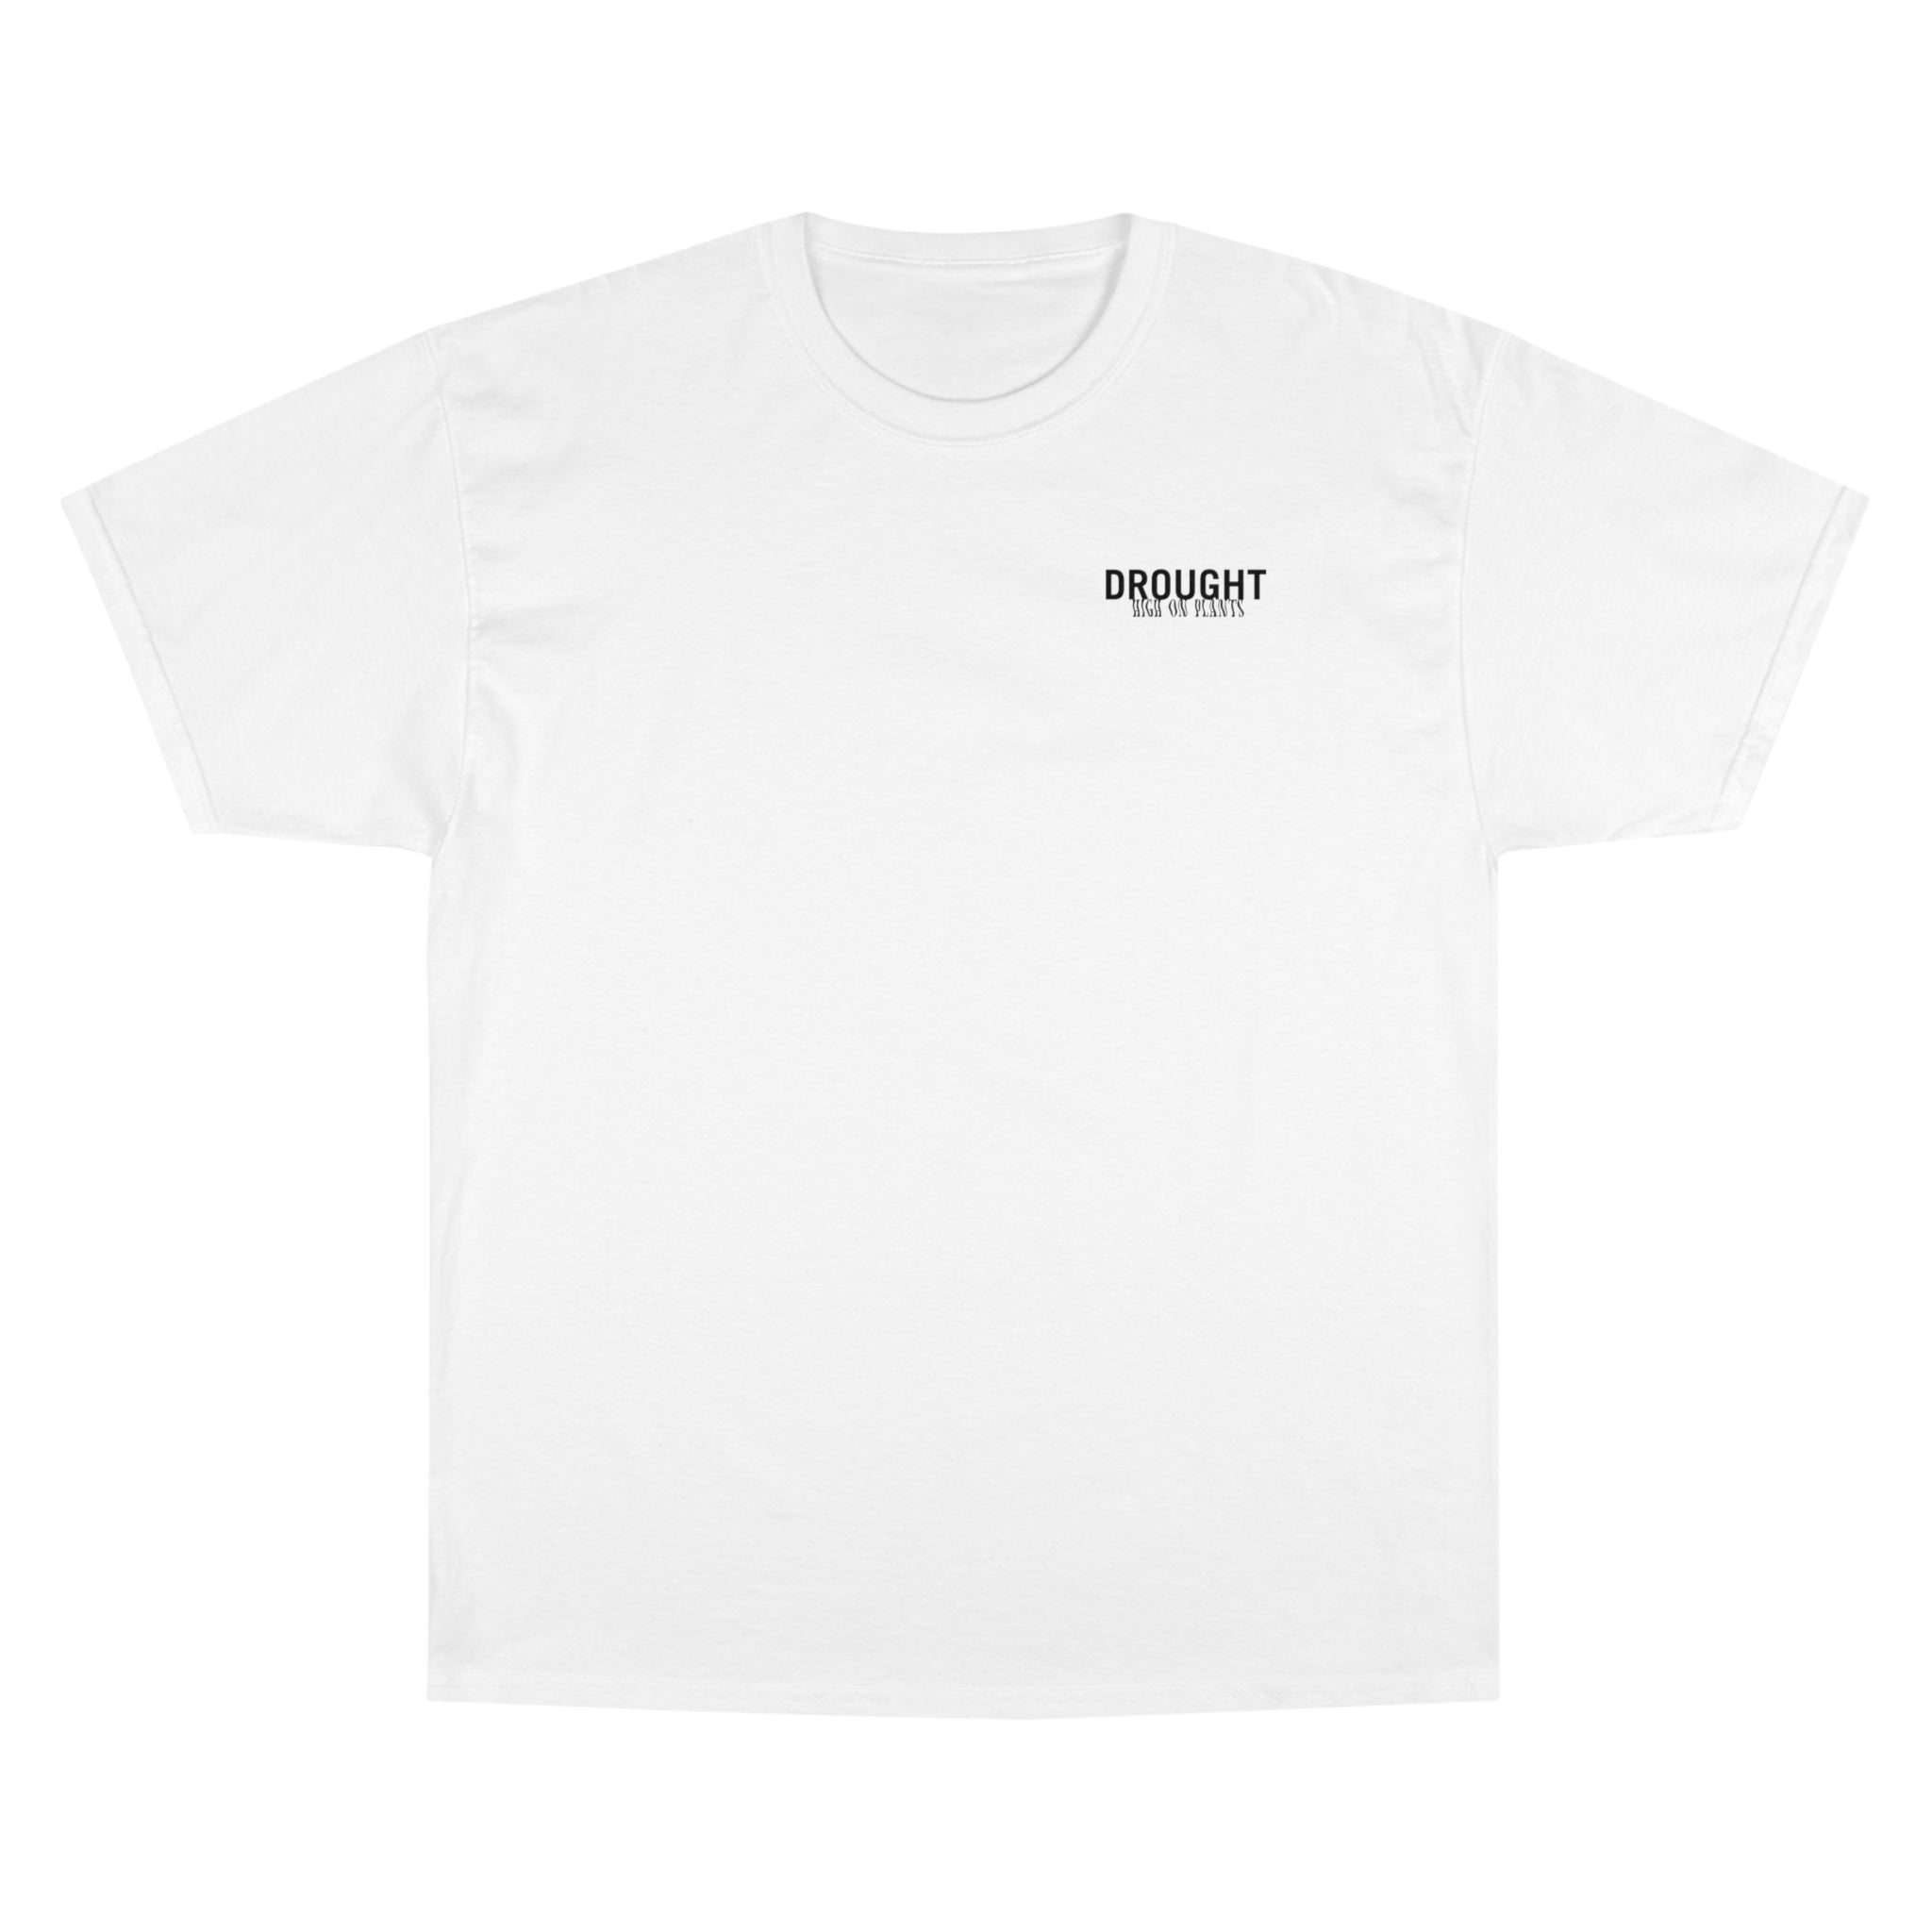 DROUGHT® Band T-Shirt (Limited Edition)